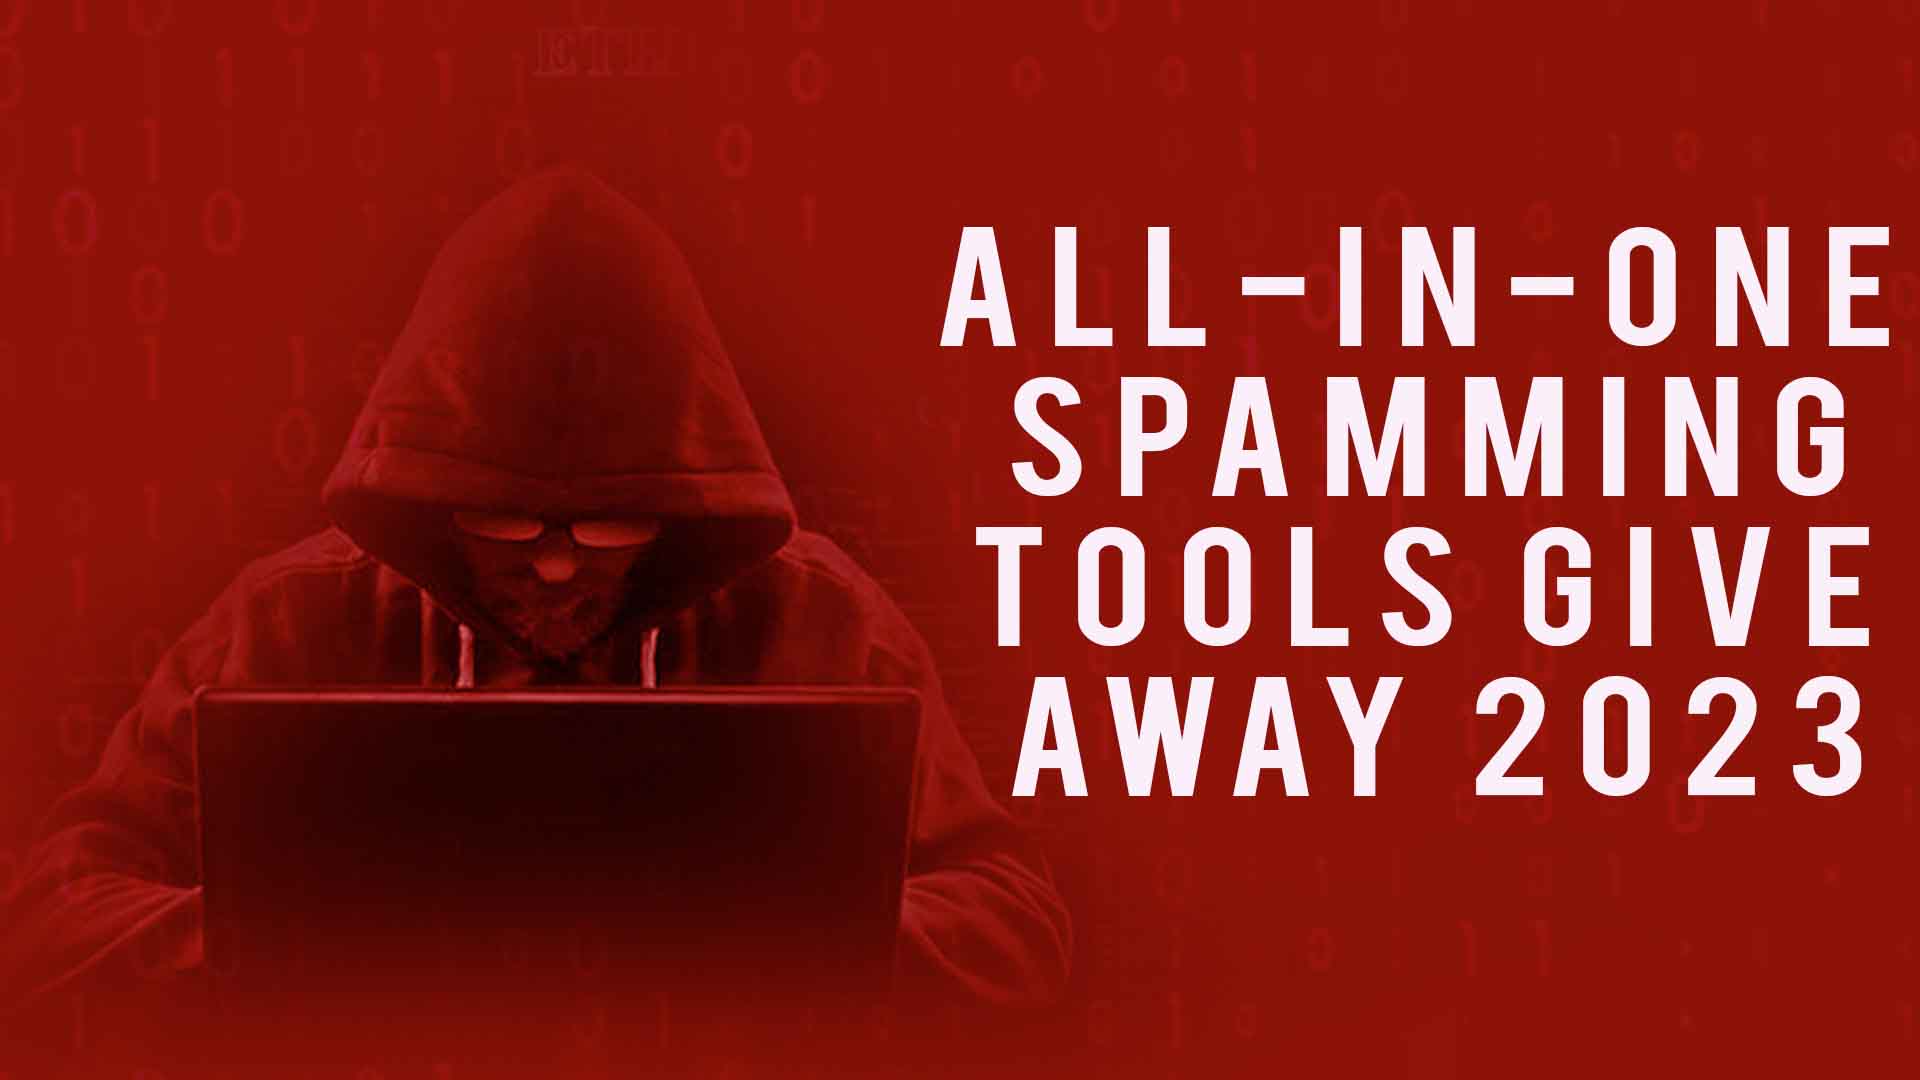 all-in-one-spamming-tools-give-away-2023